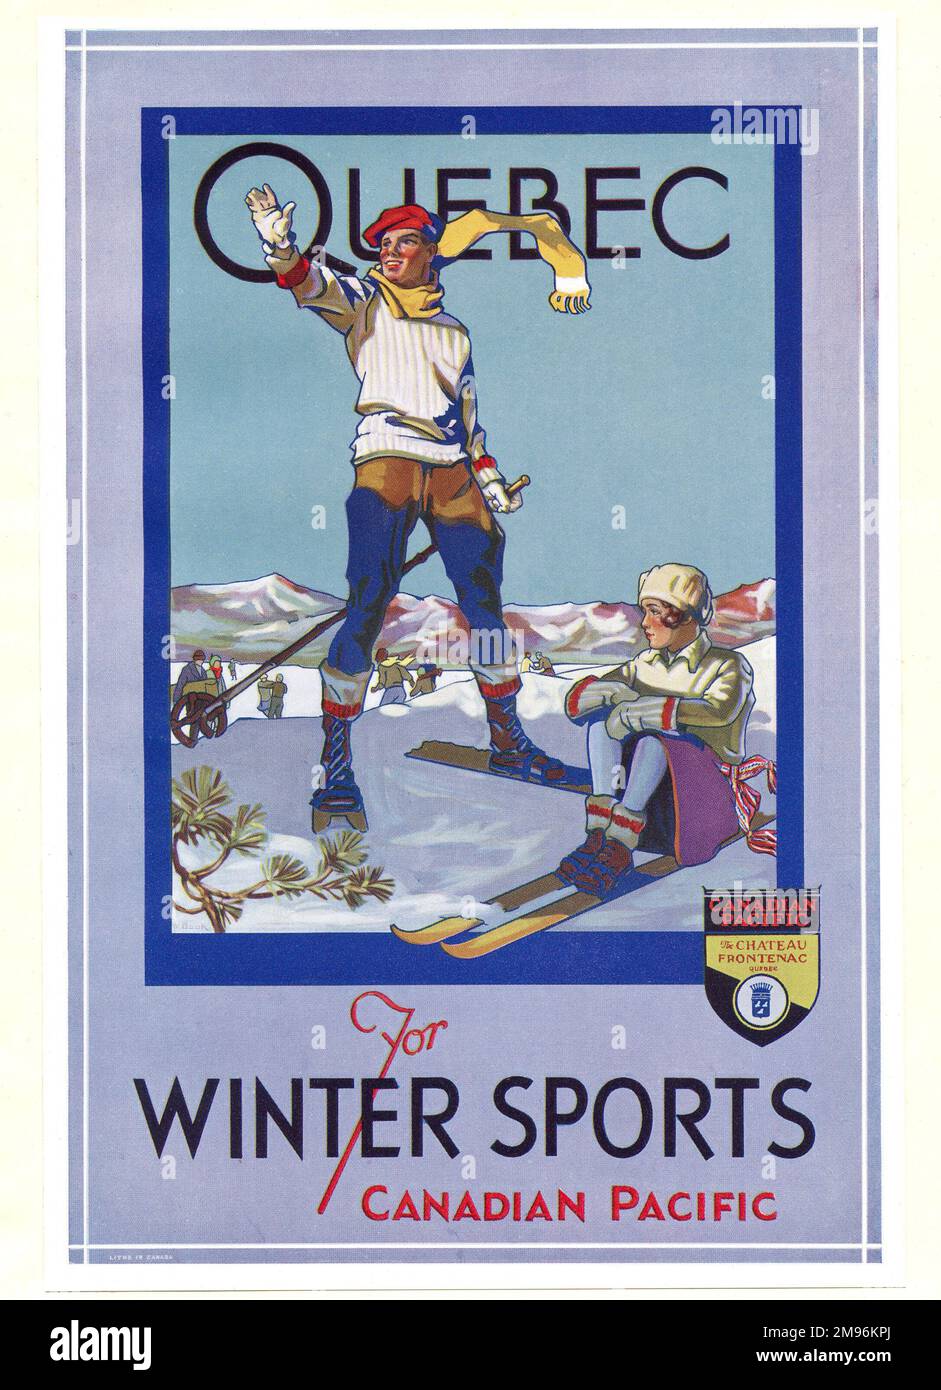 Poster design for Quebec Winter Sports, via Canadian Pacific, showing a couple on skis in in a snowy landscape. Stock Photo